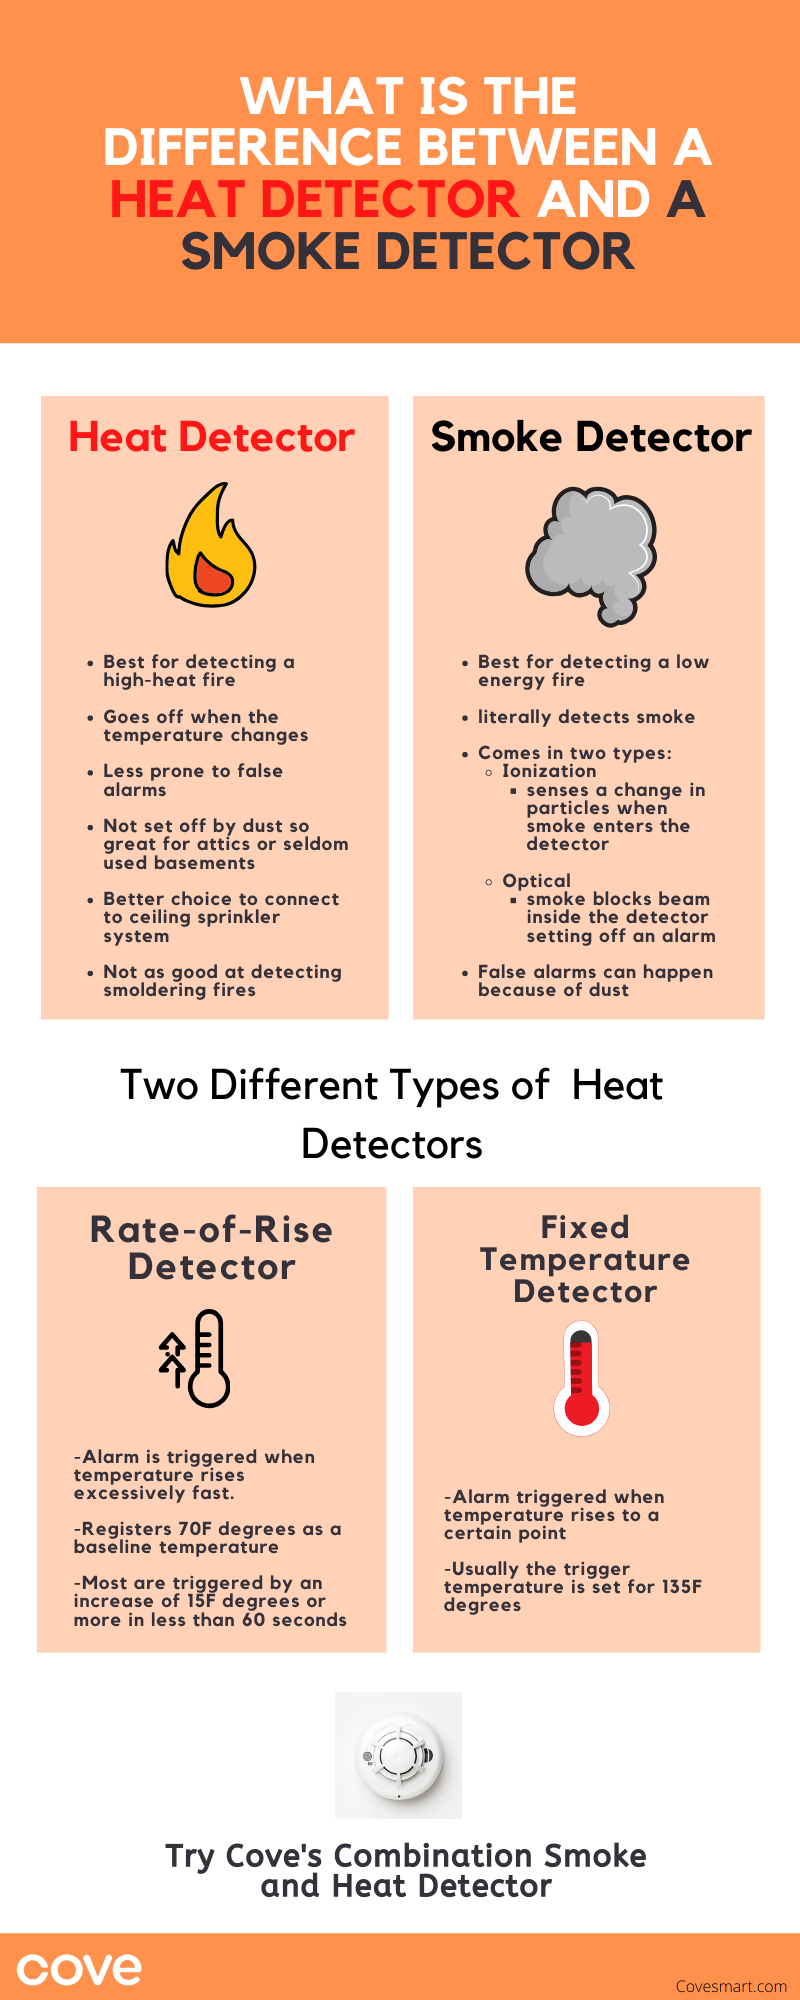 Description and images of the combination heat detector and smoke detector. Two types of heat detectors.